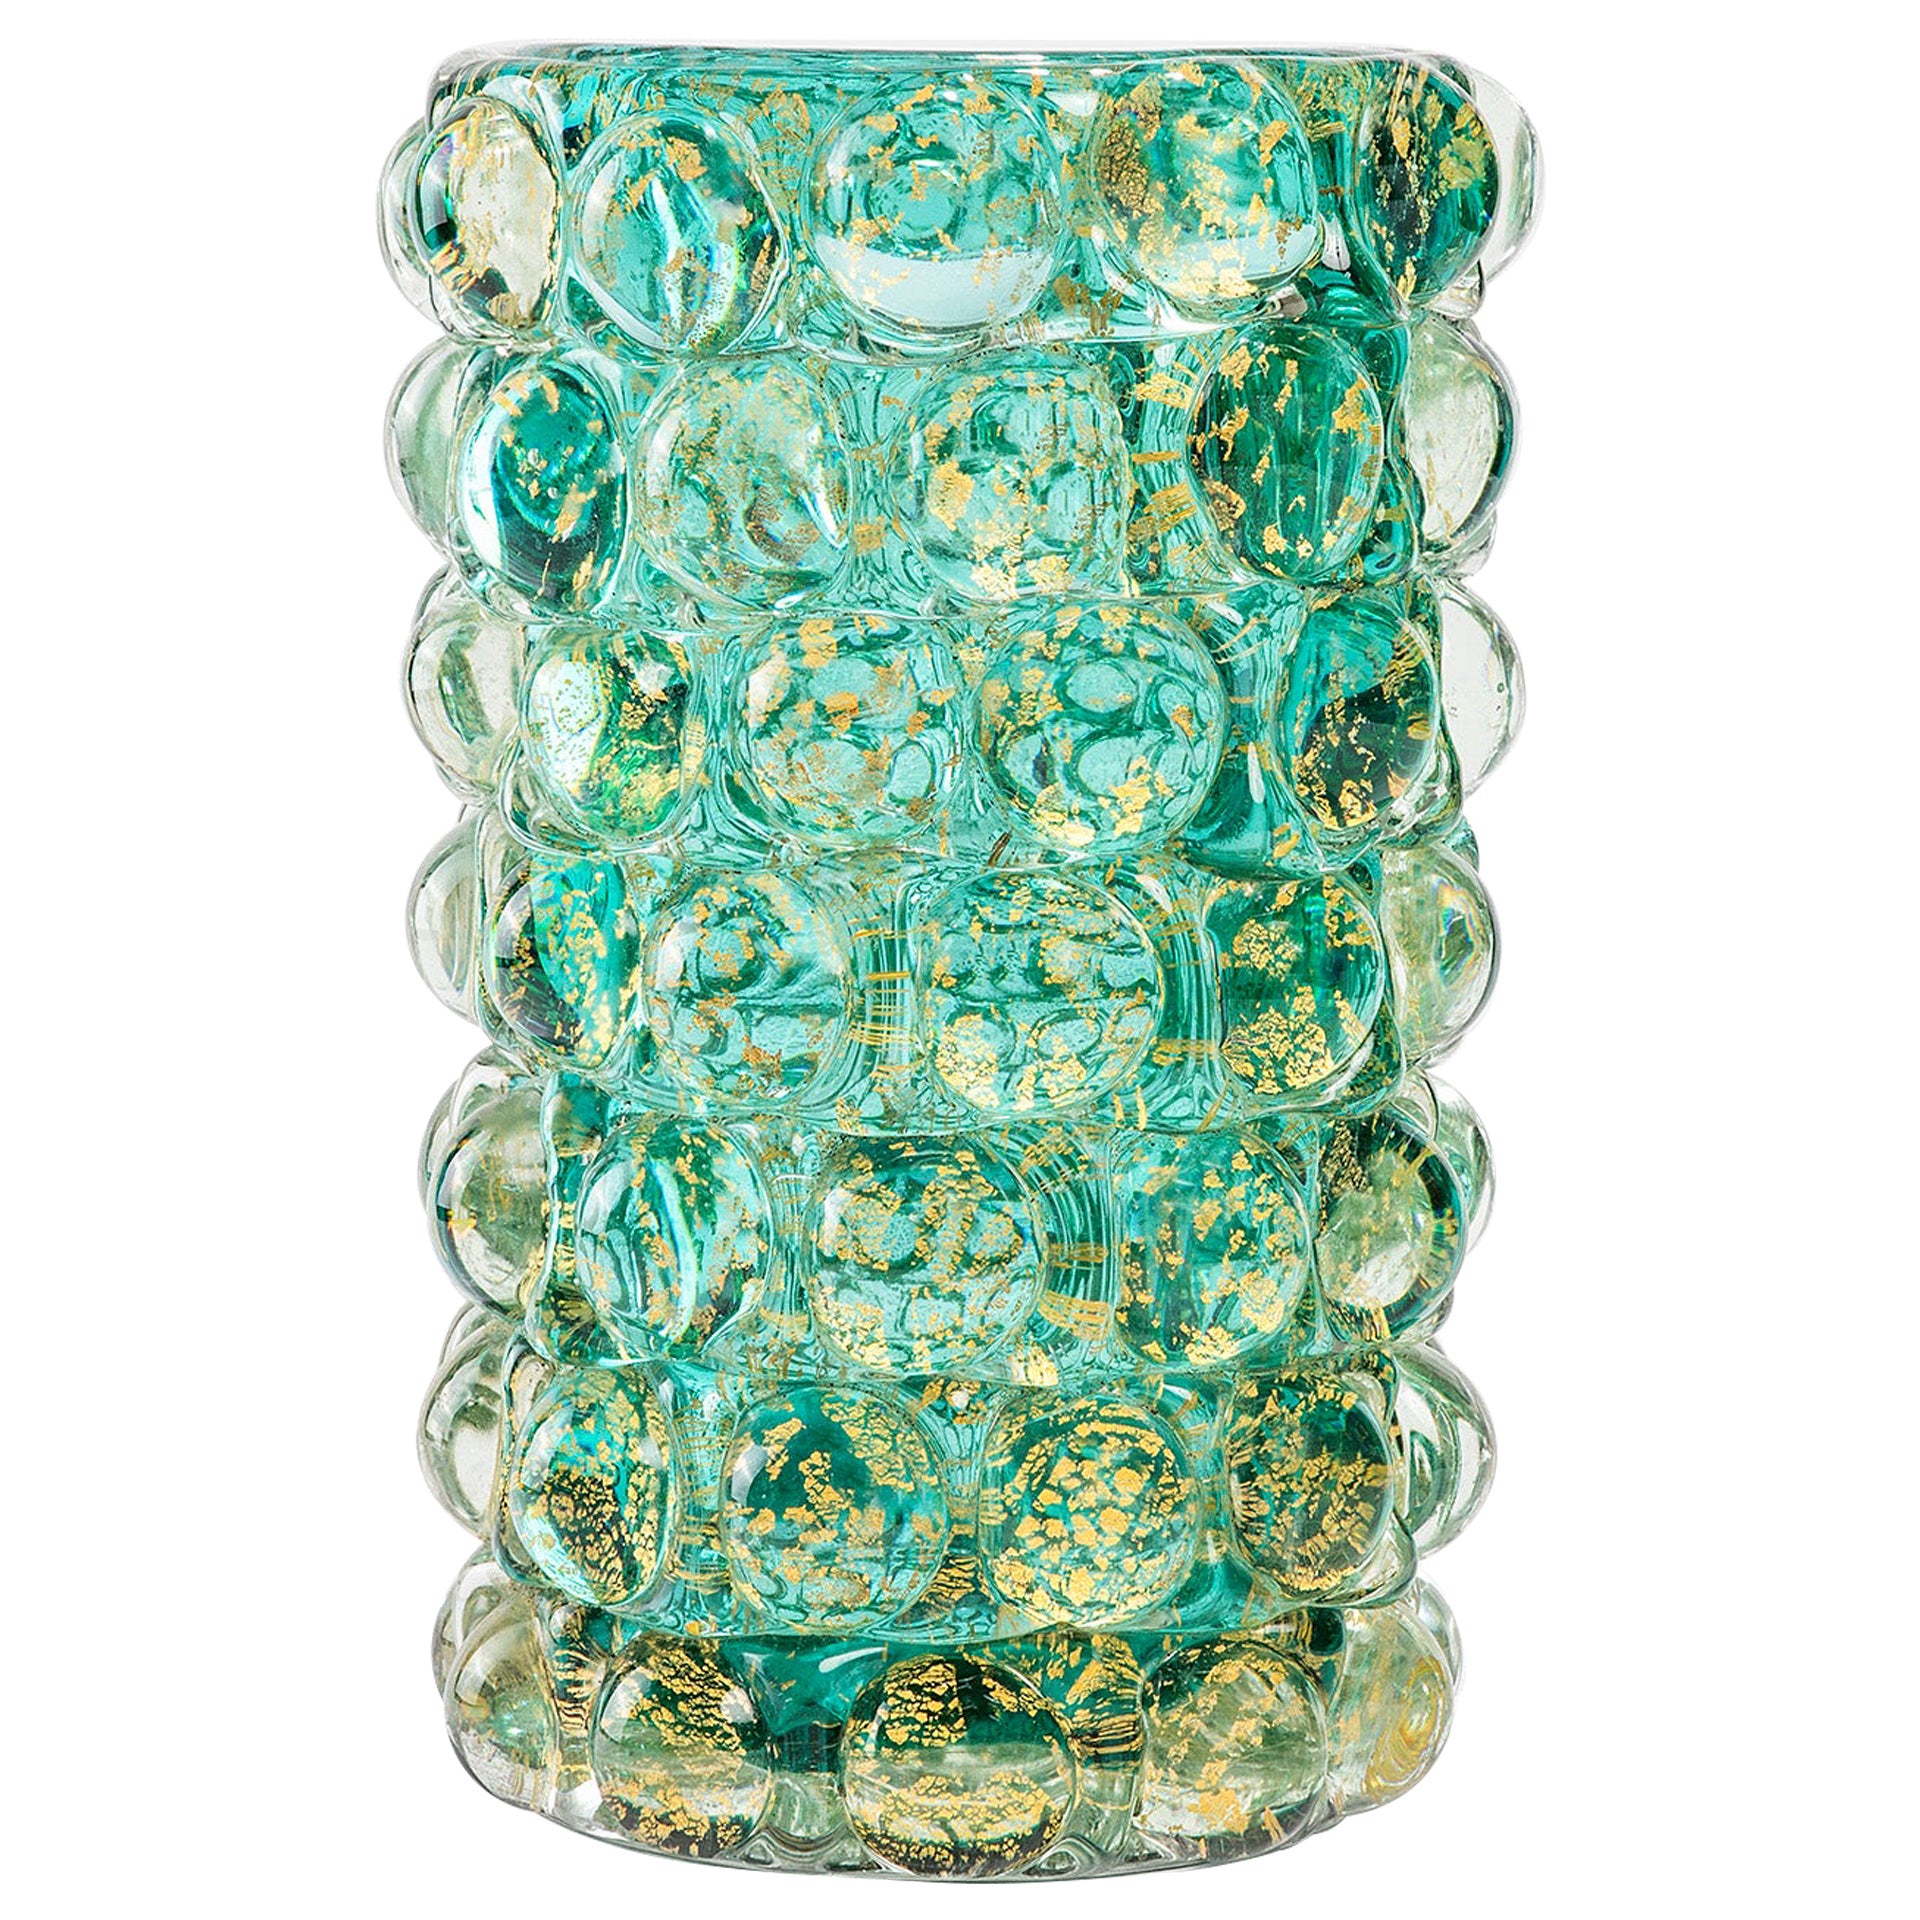 20th Century Barovier & Toso Cylindrical Glass Vase from Lenti Series, 40s For Sale